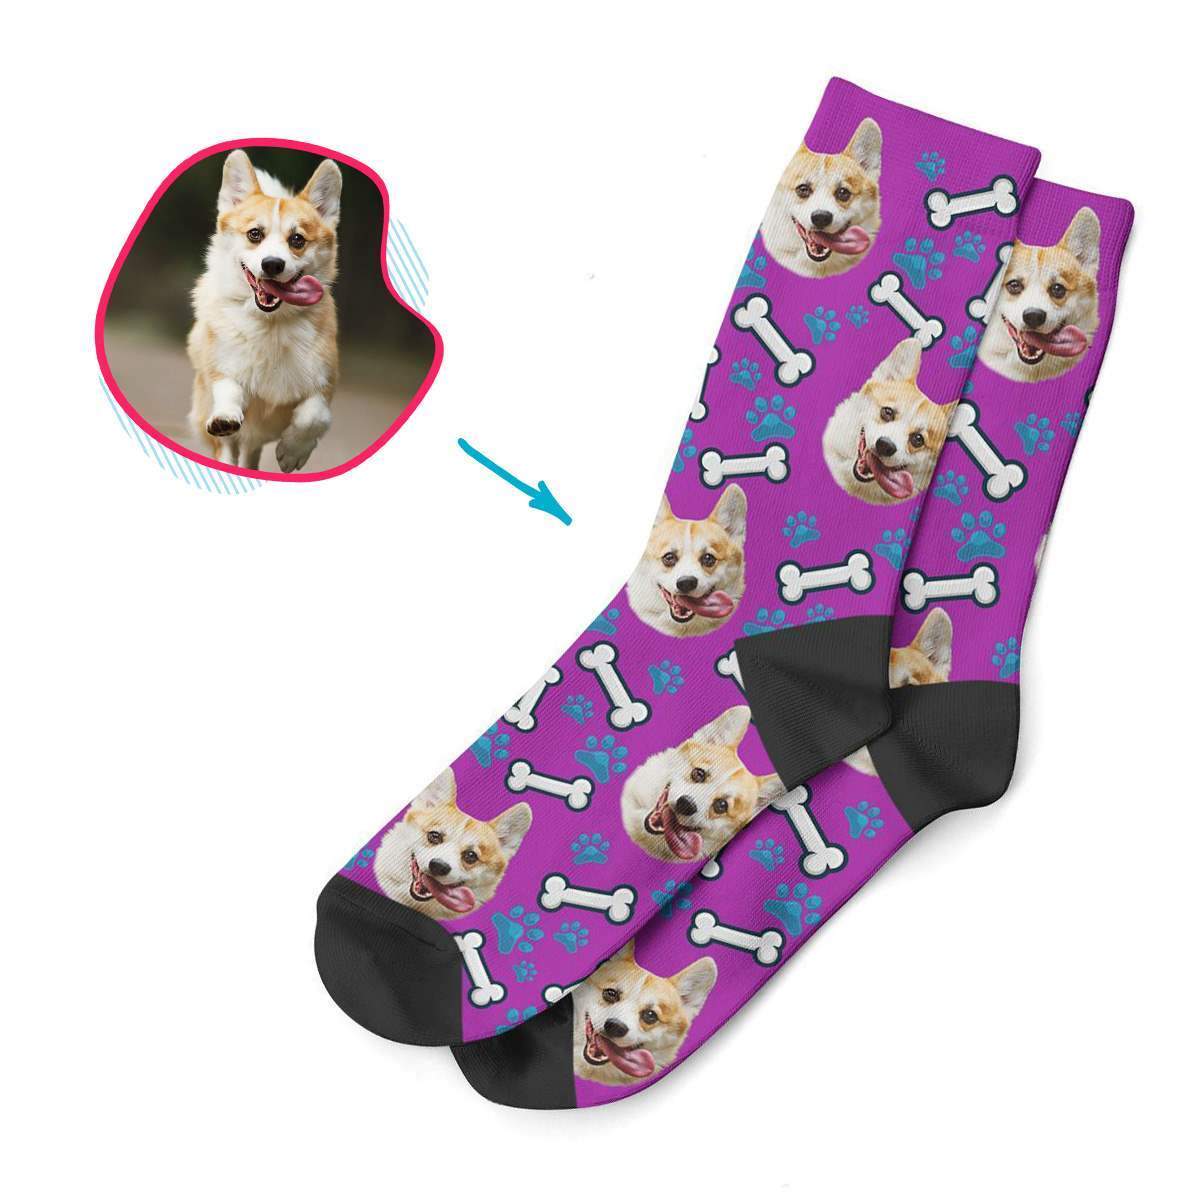 purple Dog socks personalized with photo of face printed on them